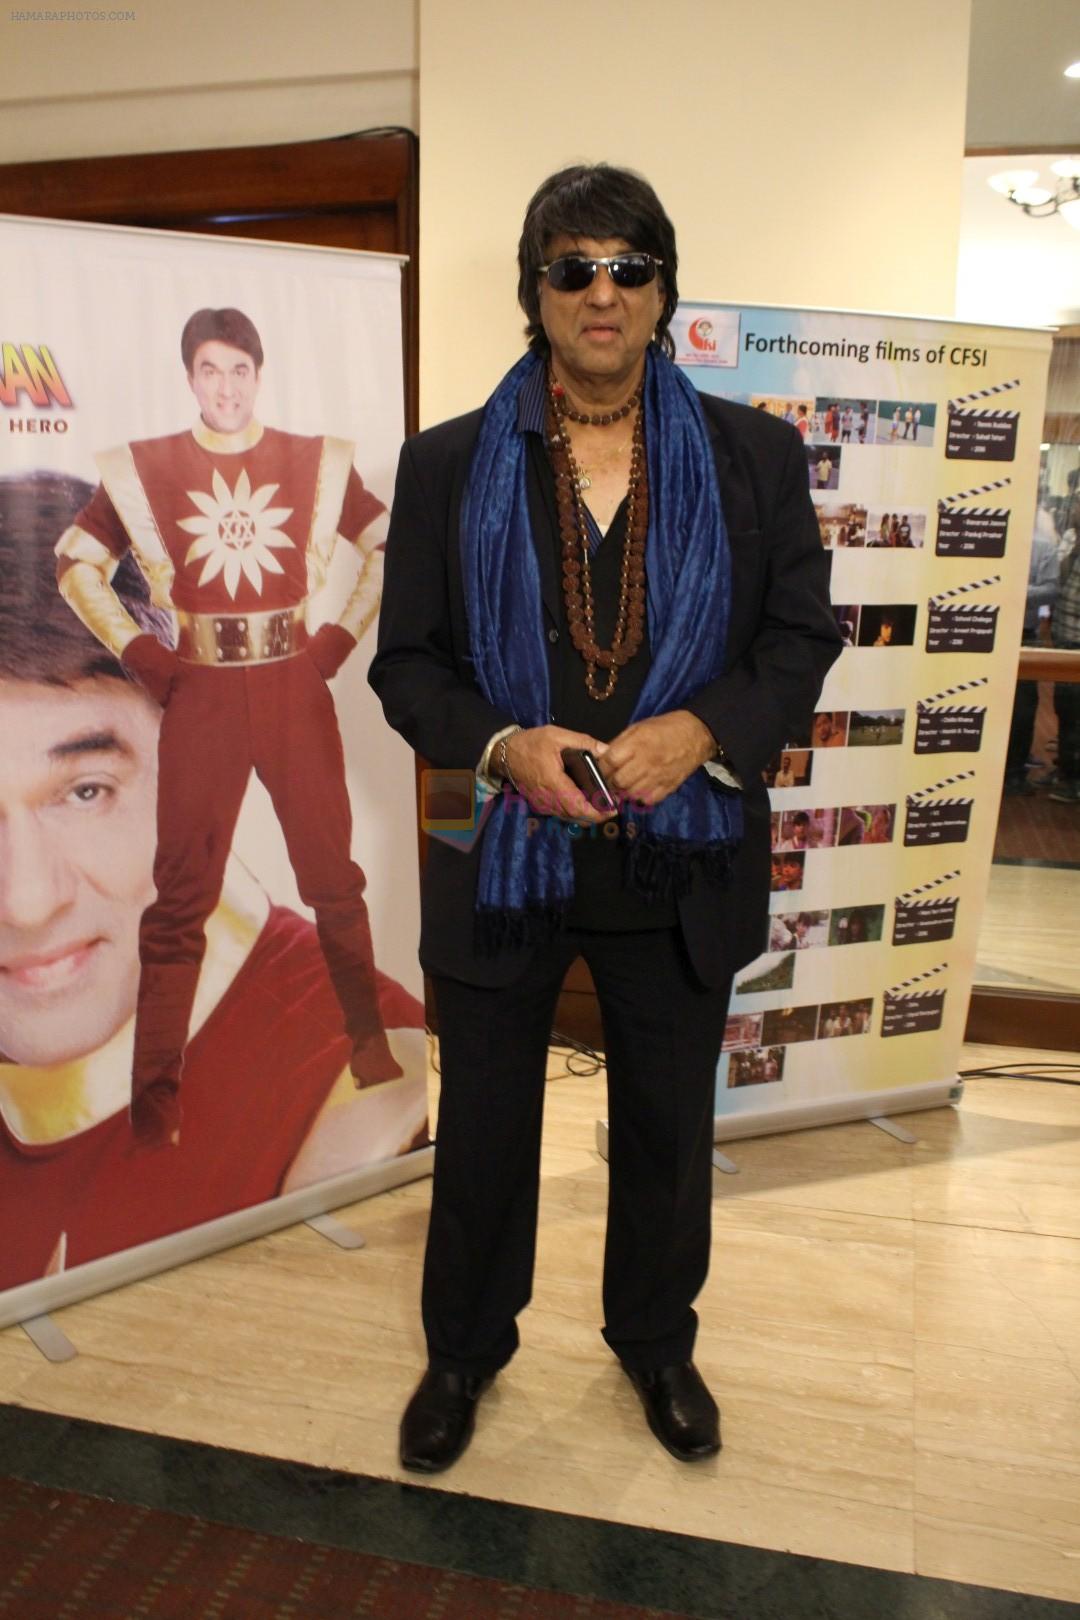 Mukesh Khanna Will Inaugurate His Website Shaktiman Wax Statue on 3rd March 2017